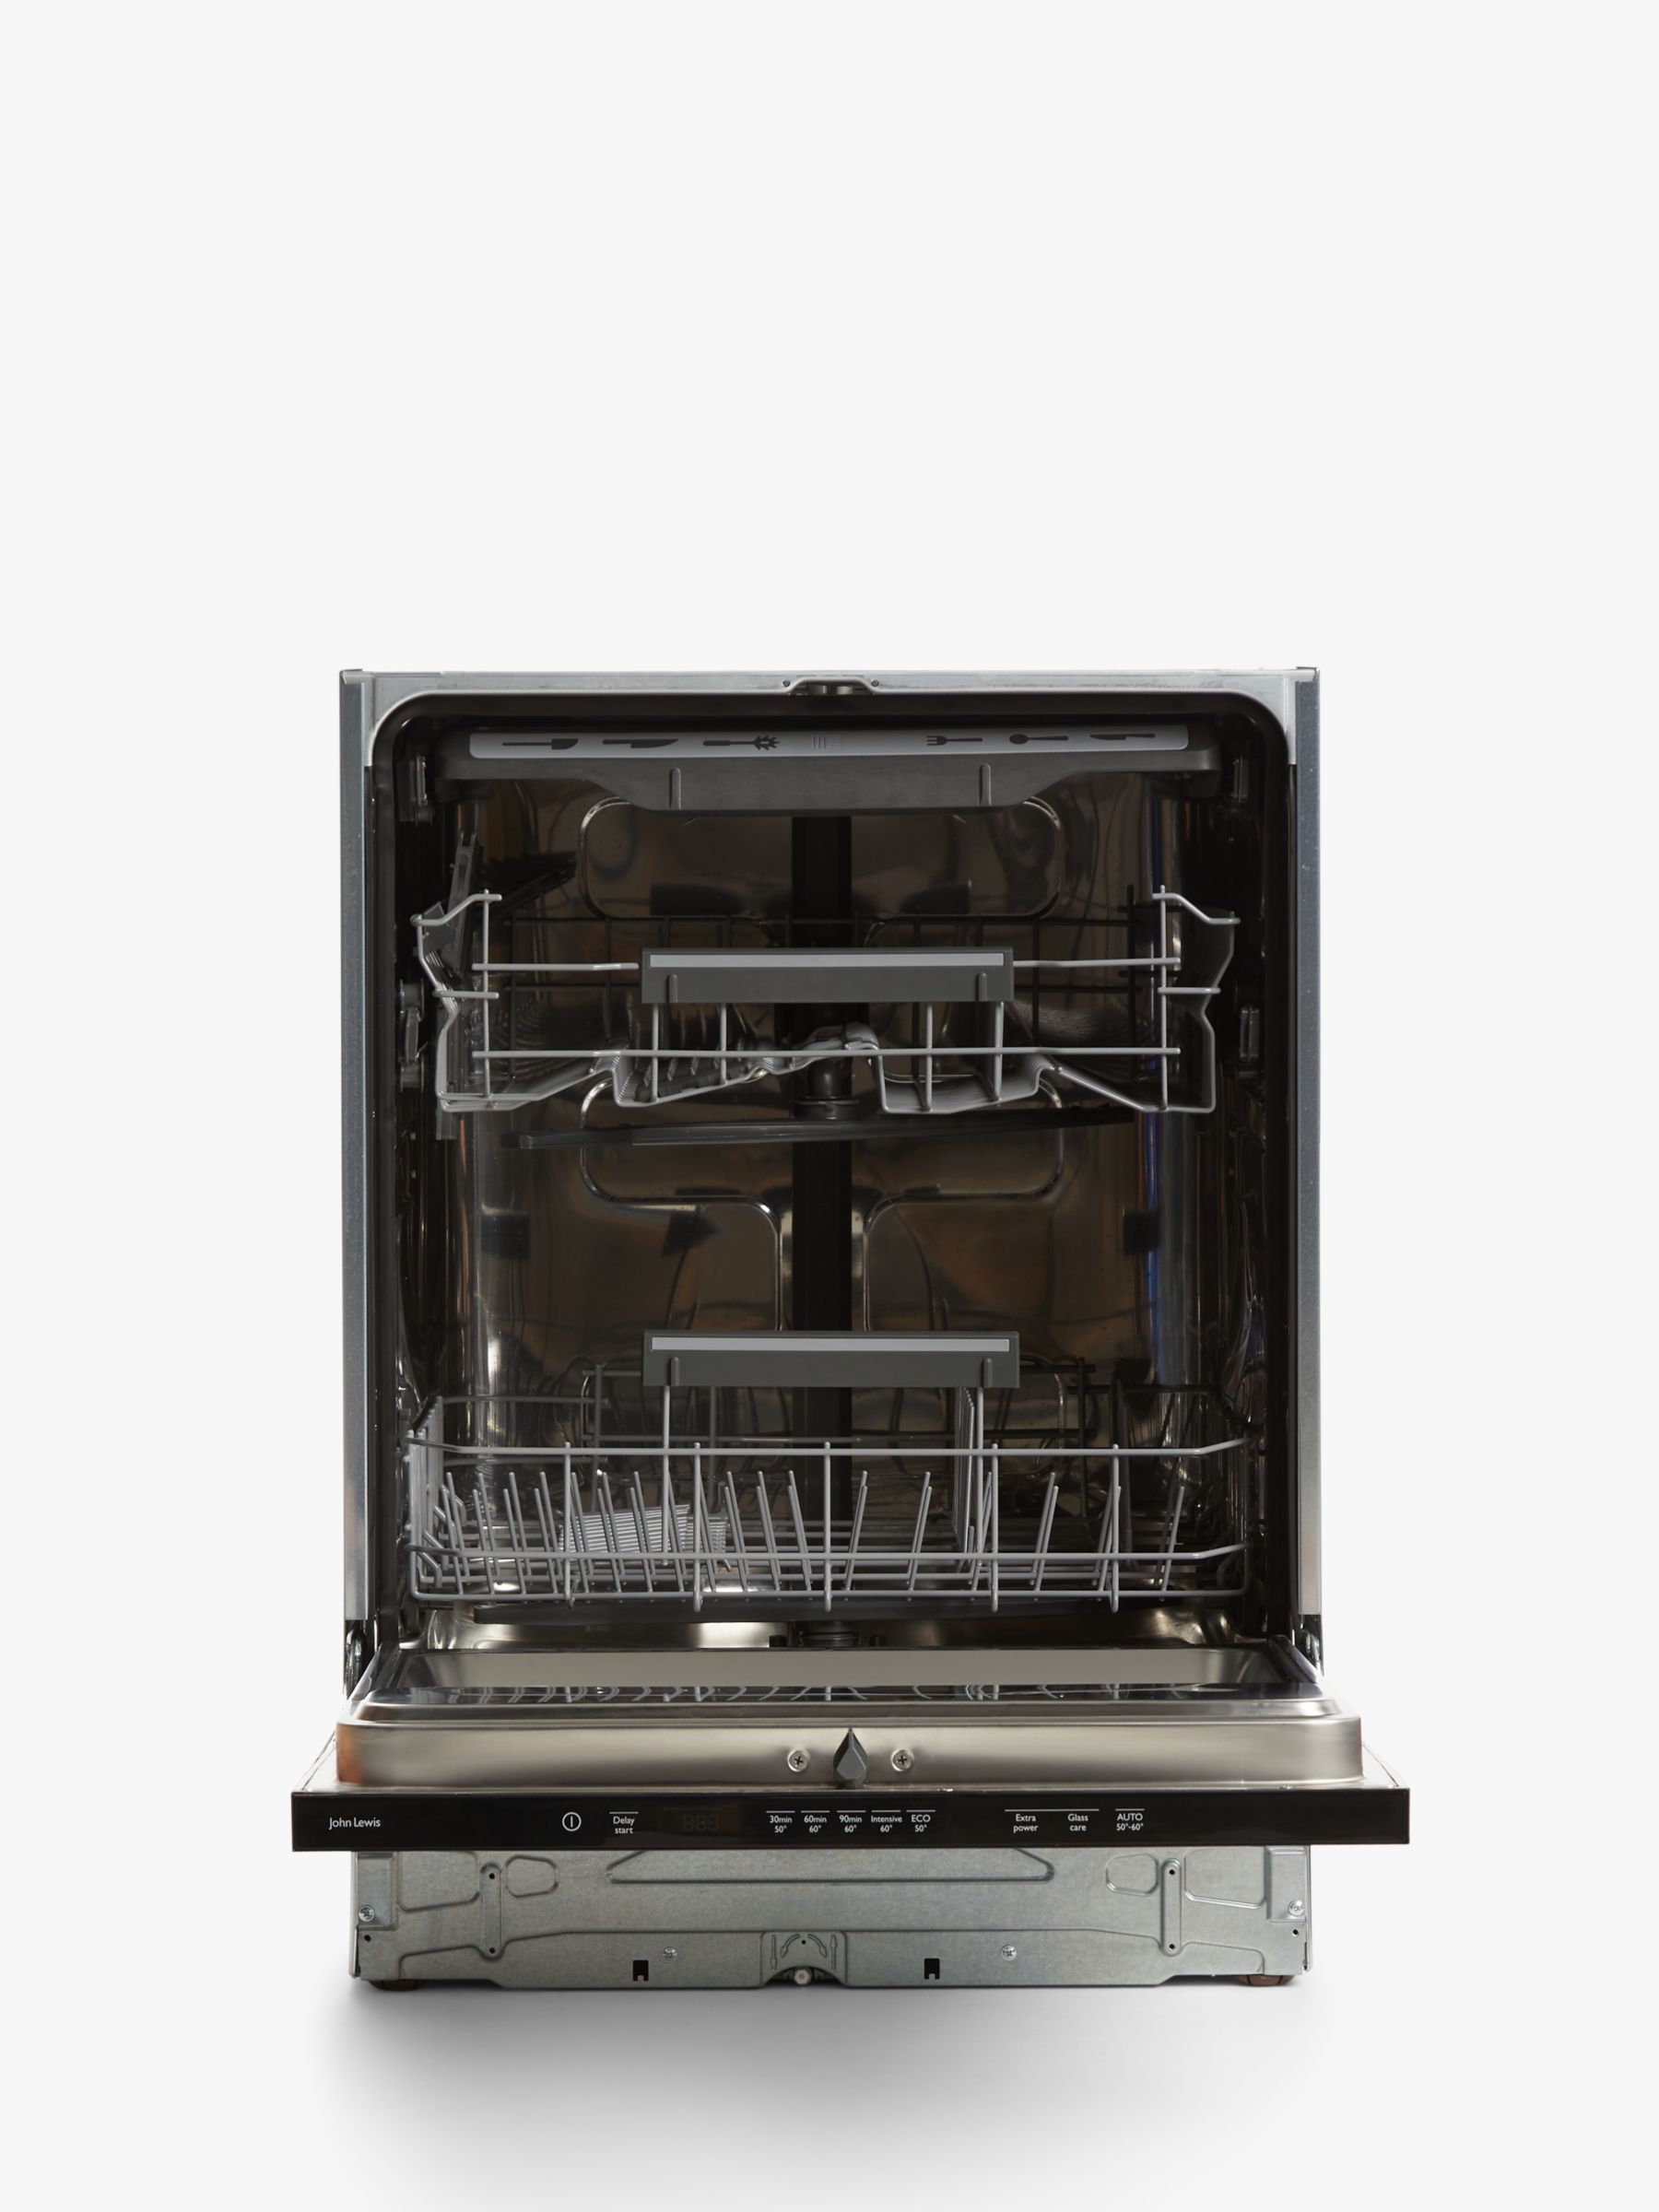 dishwasher offers